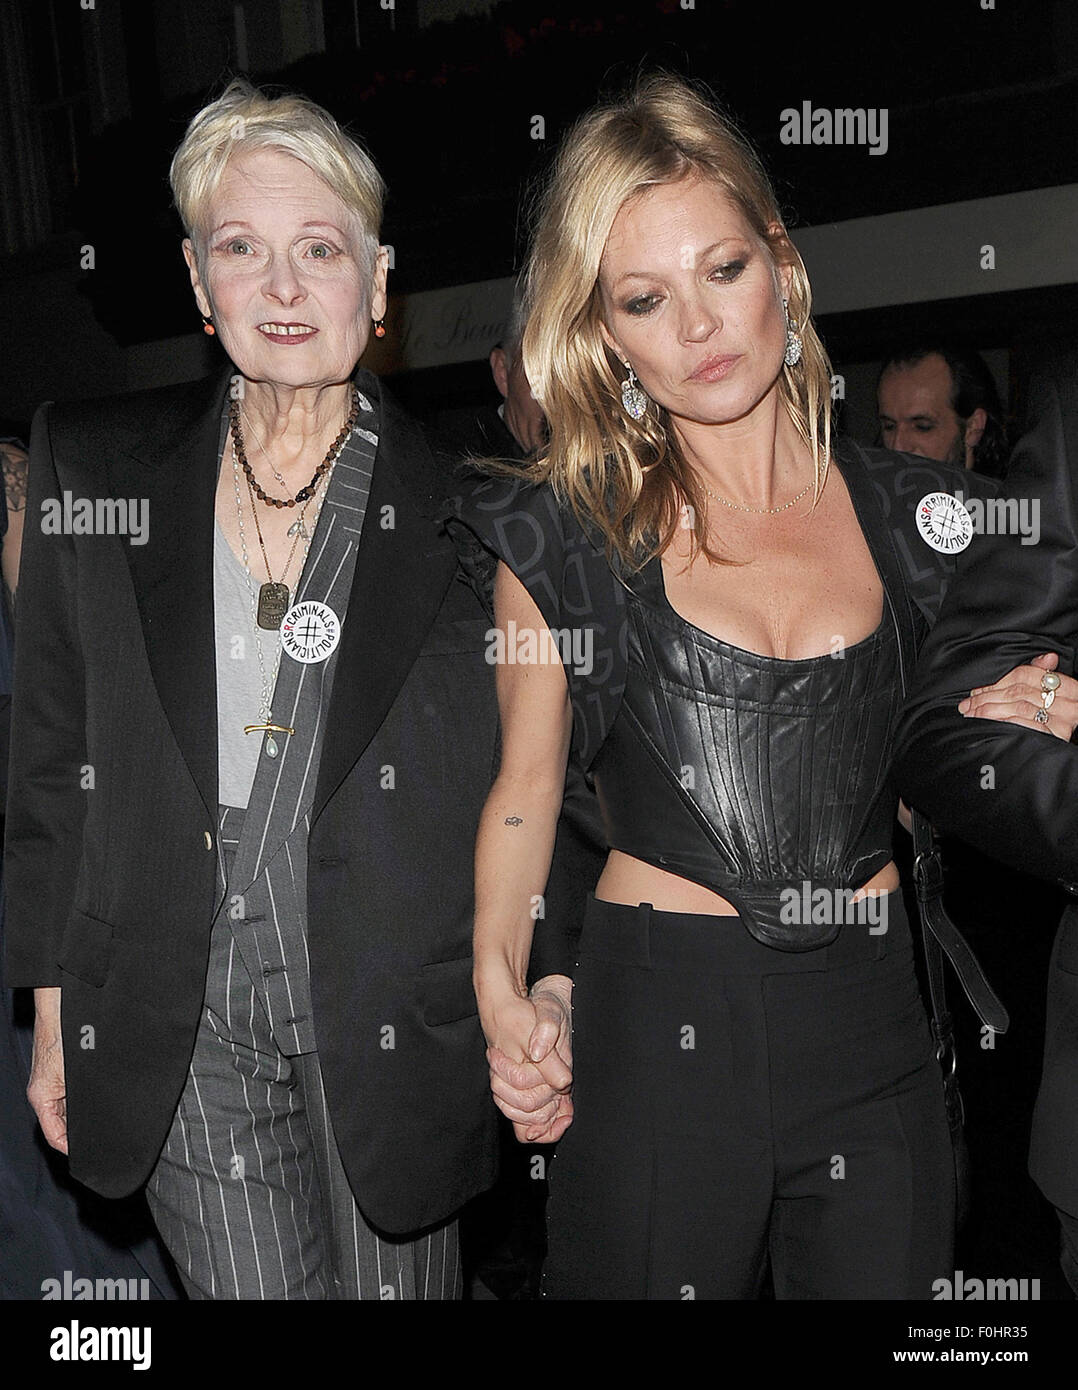 Vivienne Westwood opens up about her friendship with Kate Moss